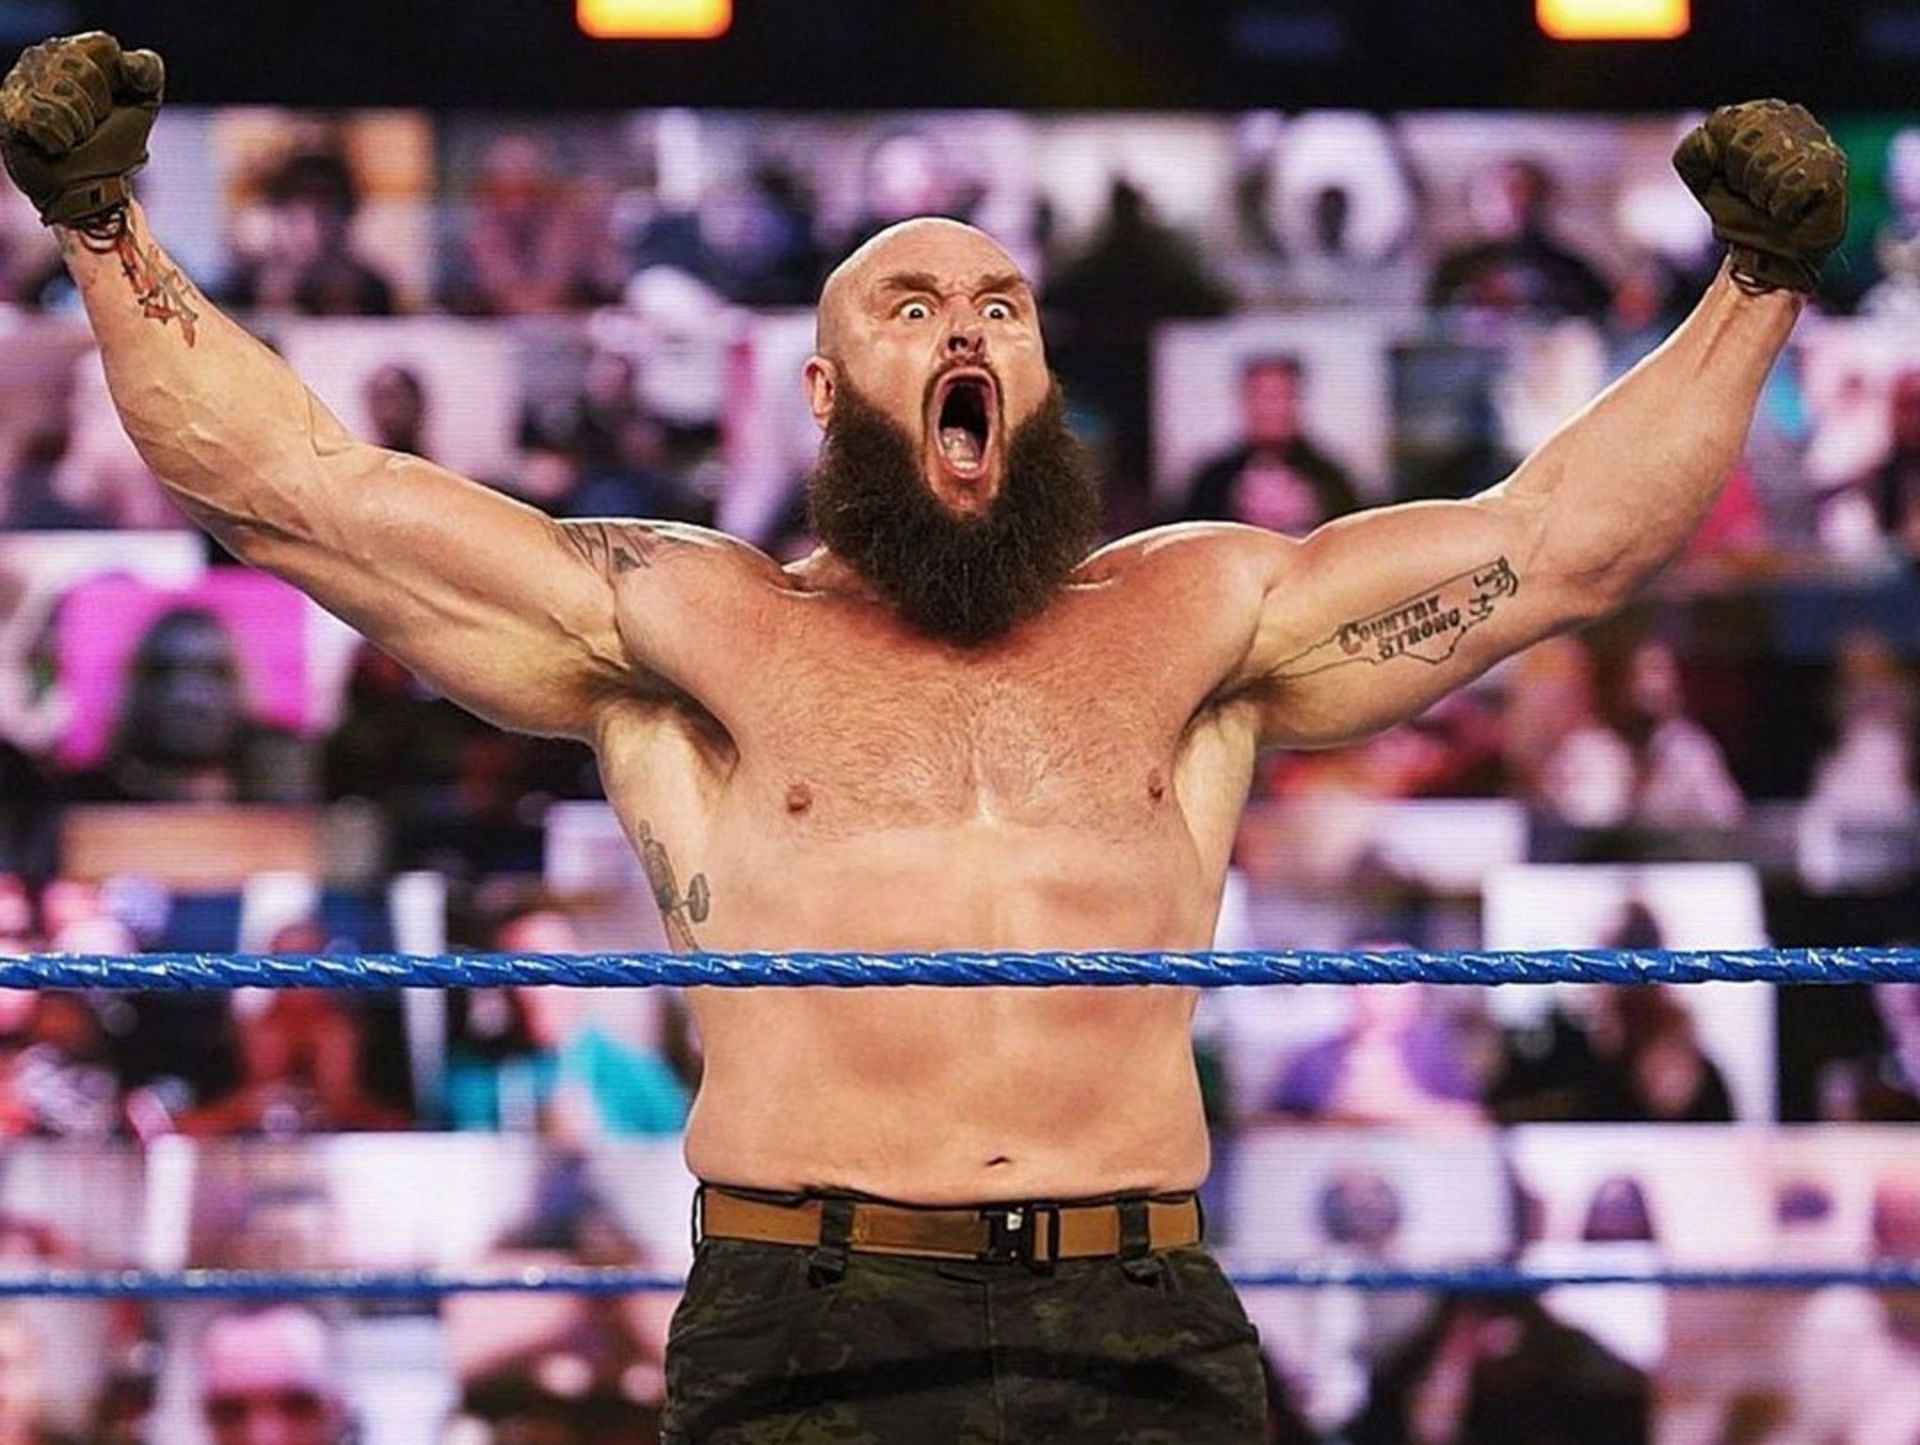 Braun Strowman was released by WWE not too long ago